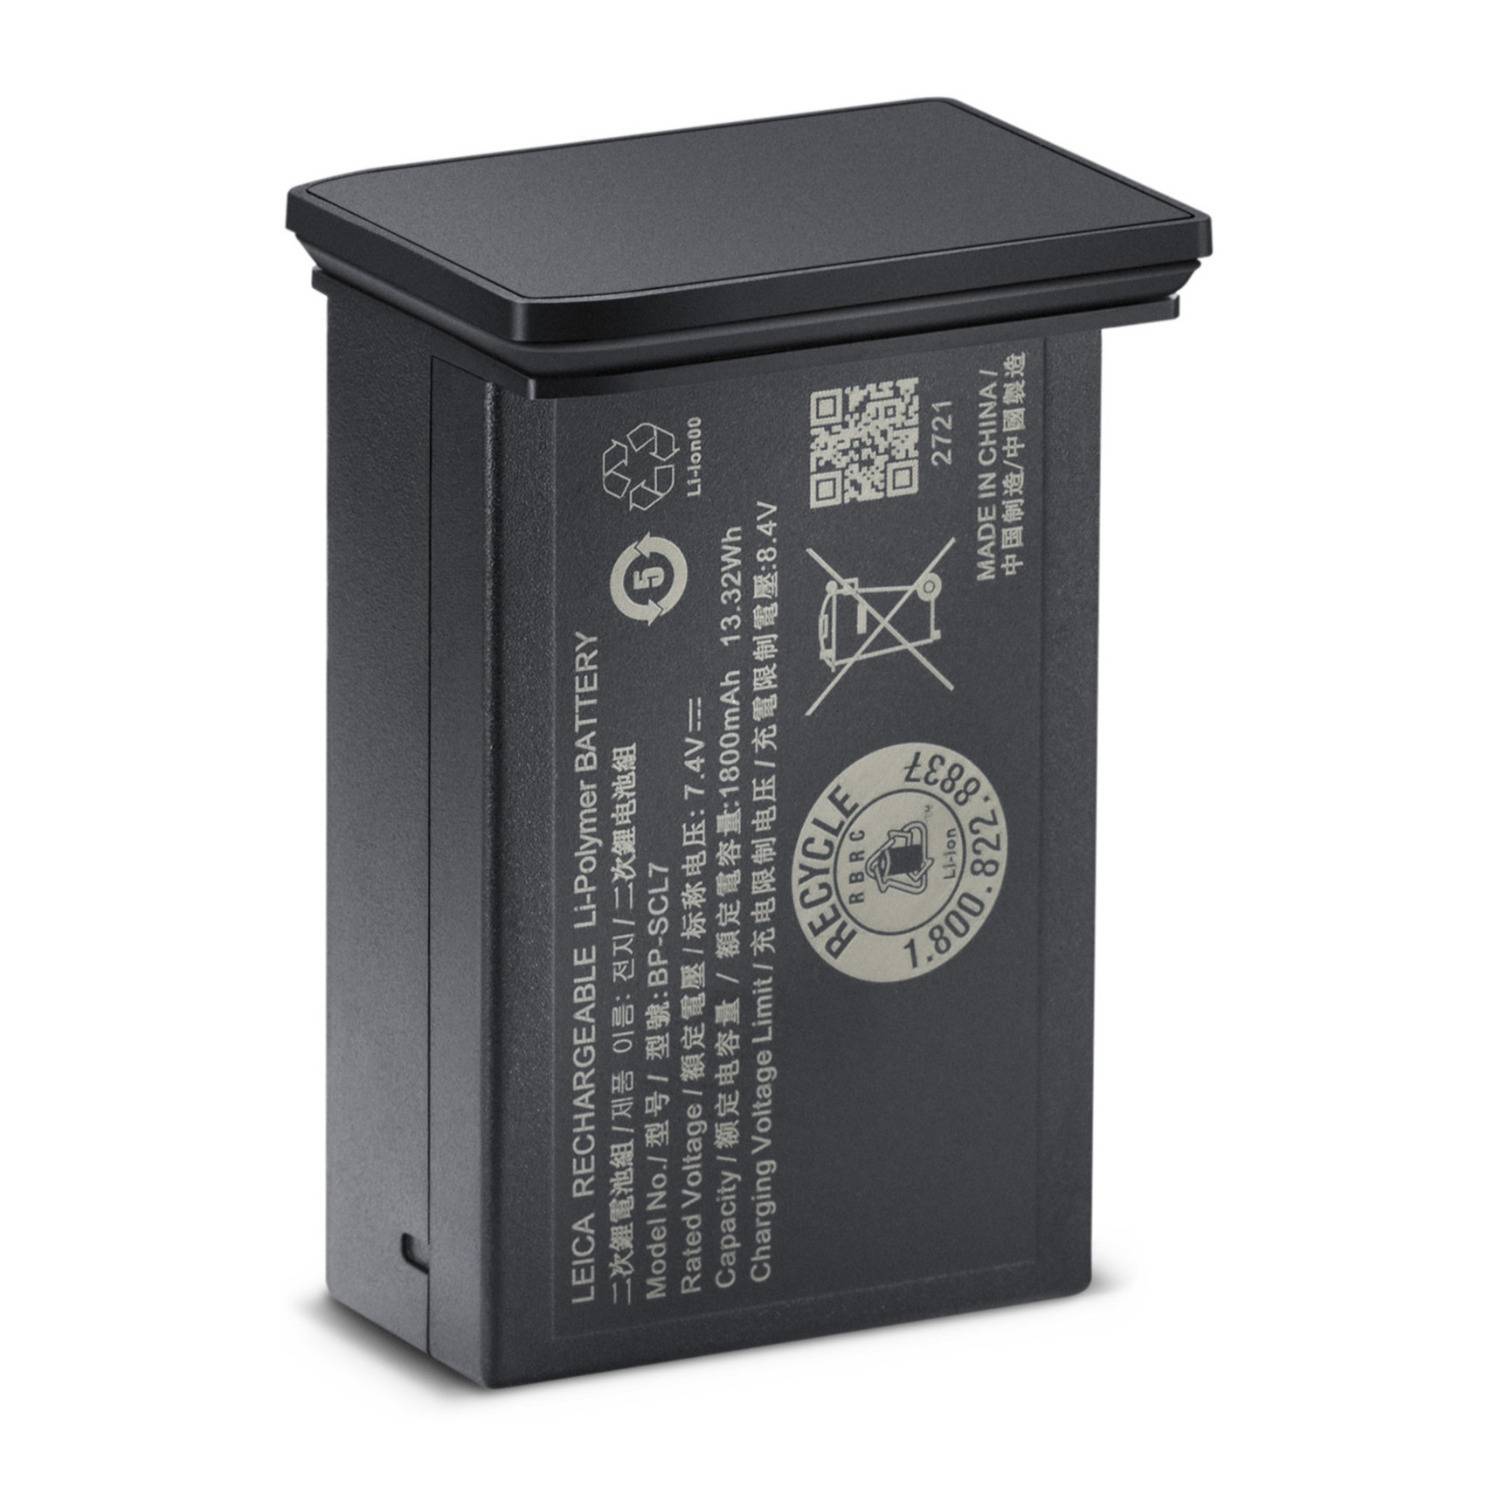 Leica Lithium-Ion BP-SCL7 Battery for M11 Camera (Black)